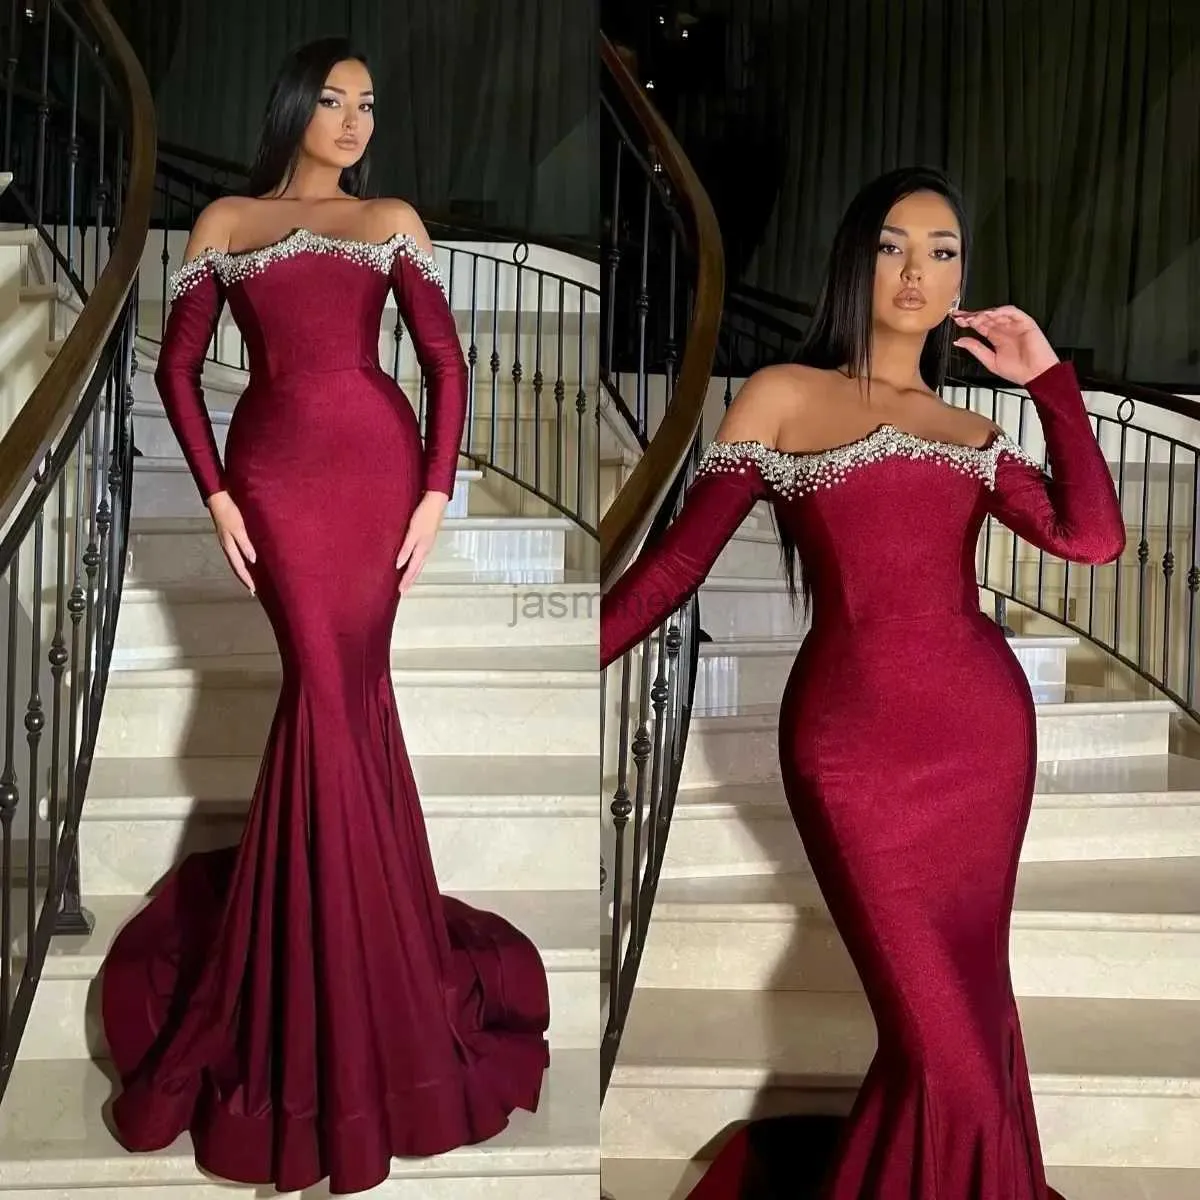 Urban Sexy Dresses Mermaid prom dress crystal off shoulder formal evening dresses elegant long sleeves party for special occasions promdress 24410